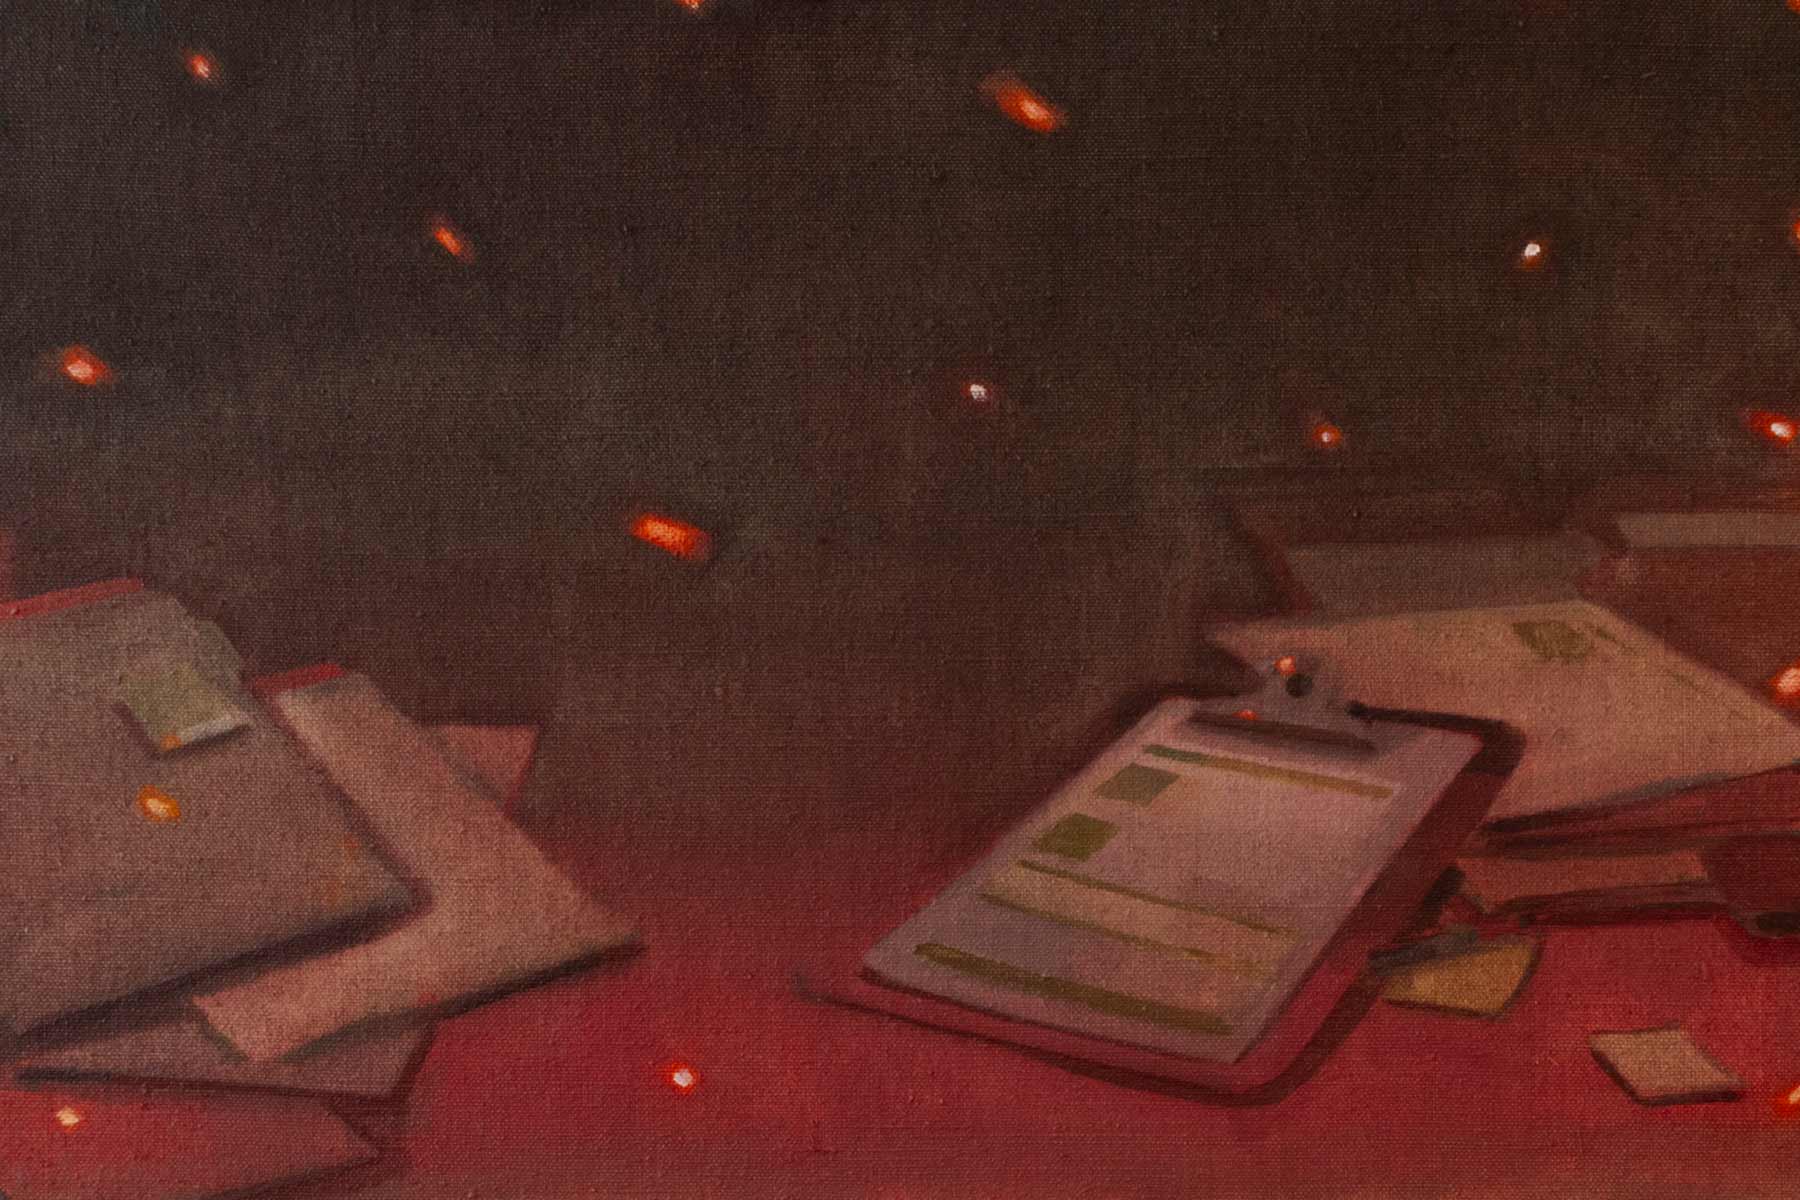 A painting of piles of medical paperwork in a dark room on fire.